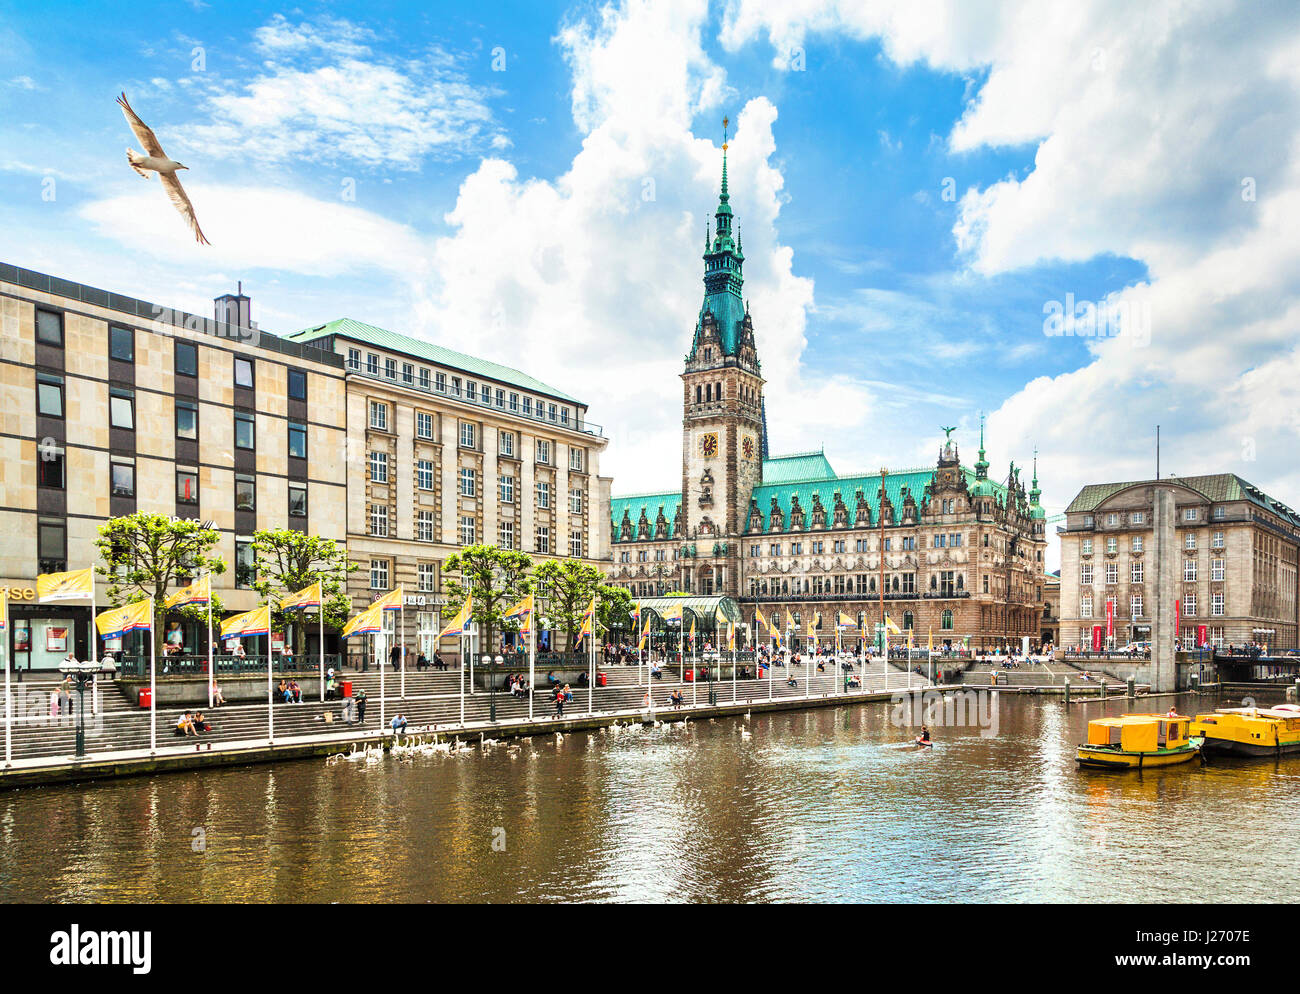 Beautiful view of Hamburg city center with town hall and Alster river, Germany Stock Photo